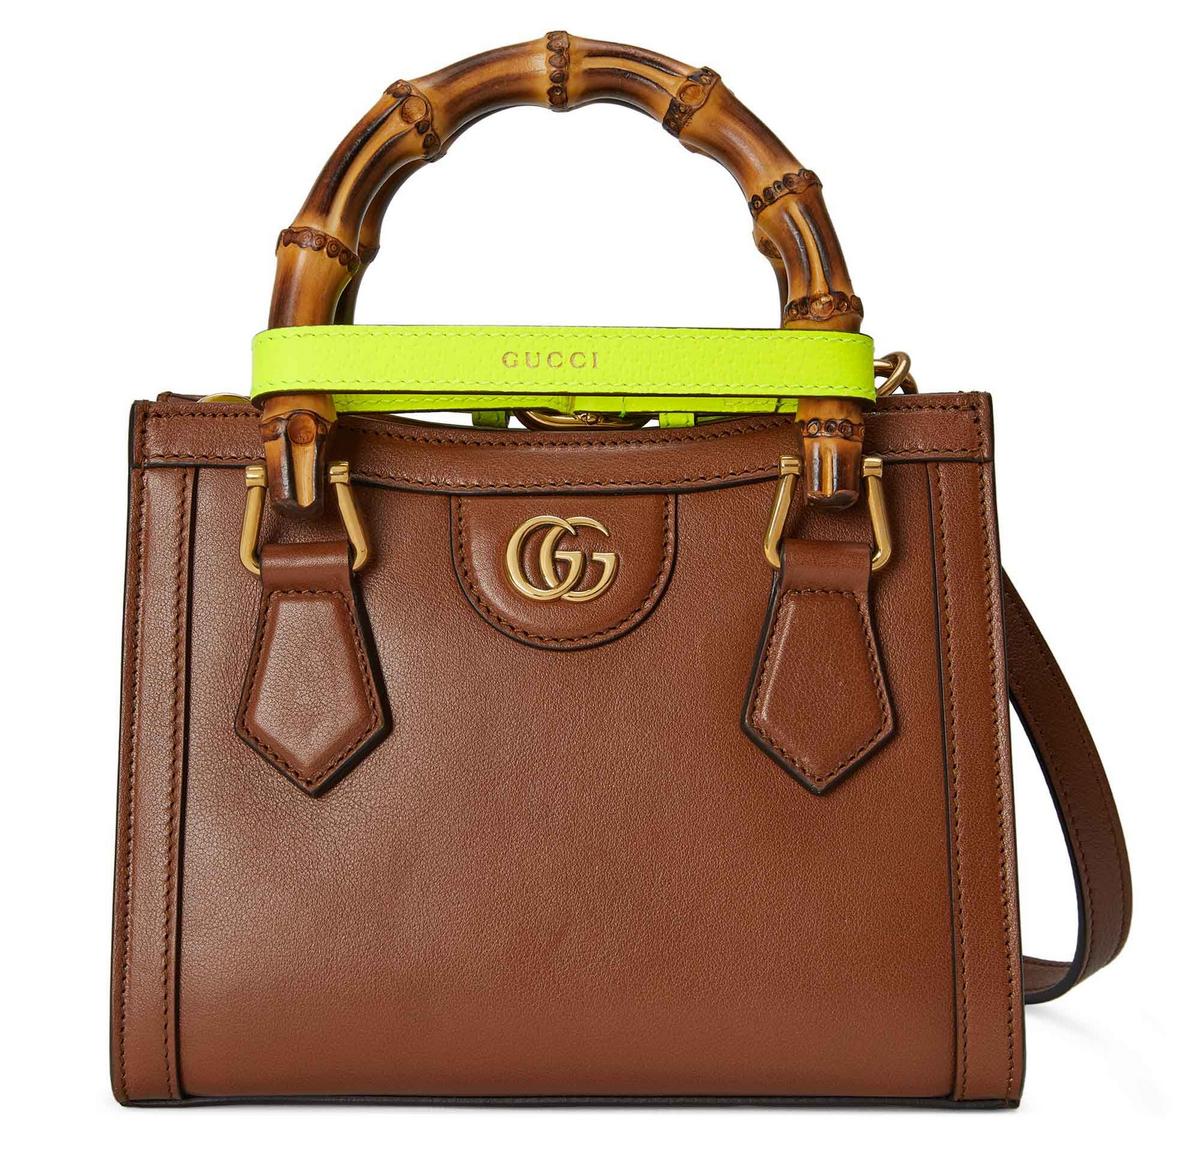 Royal Tribute: Gucci brings back Princess Diana's favorite handbag from the  '90s with removable neon-bright leather belts - Luxurylaunches